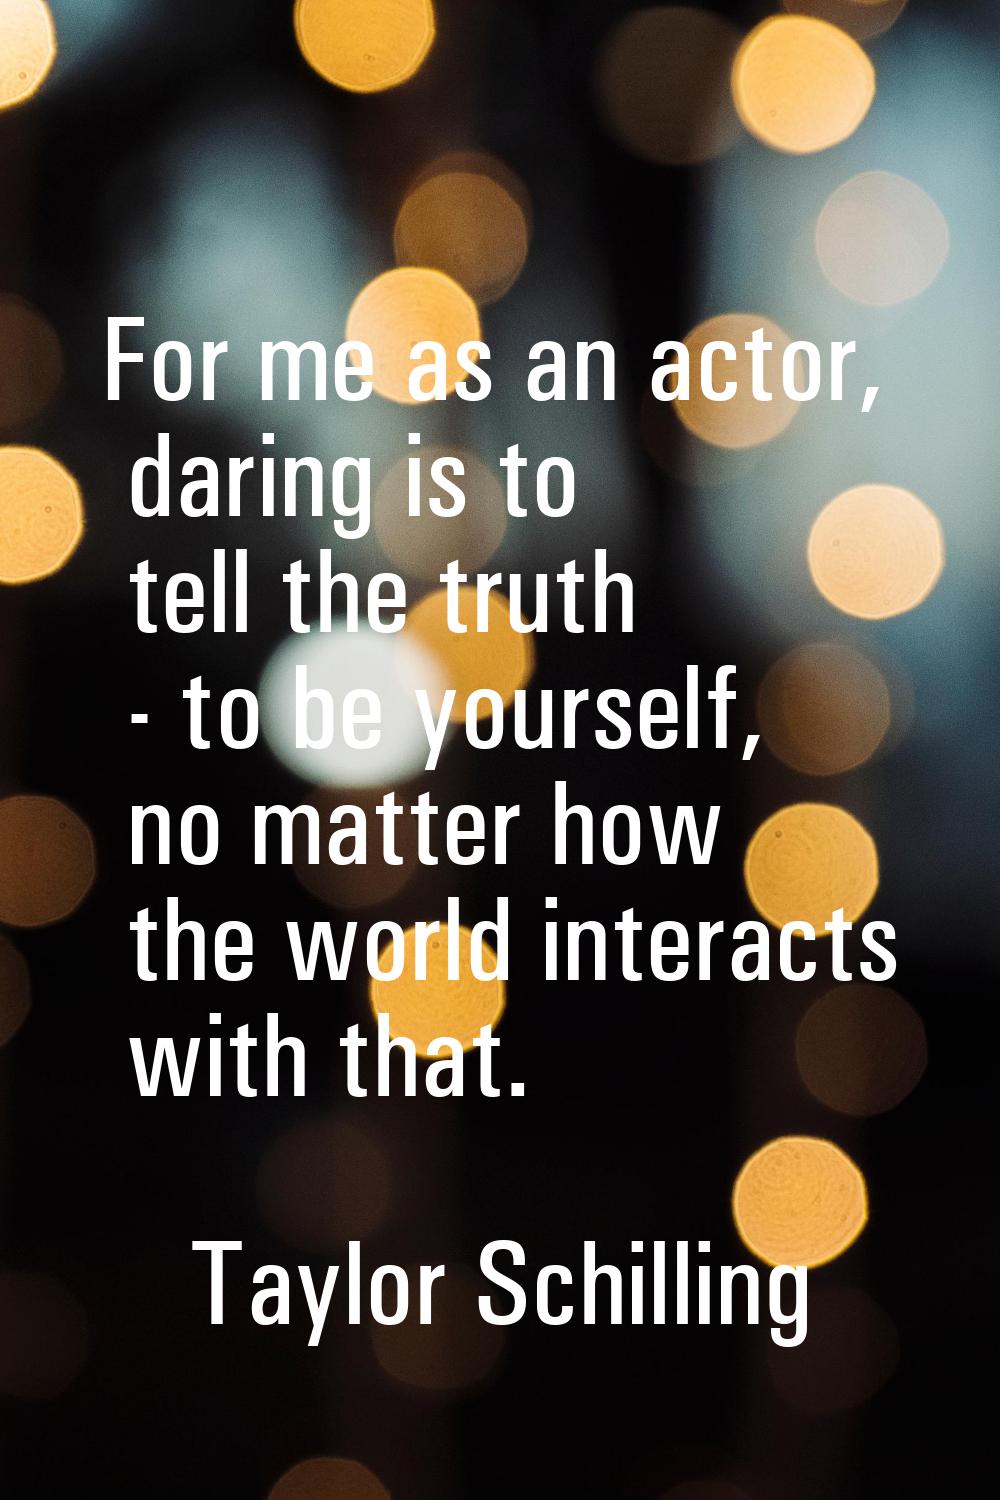 For me as an actor, daring is to tell the truth - to be yourself, no matter how the world interacts